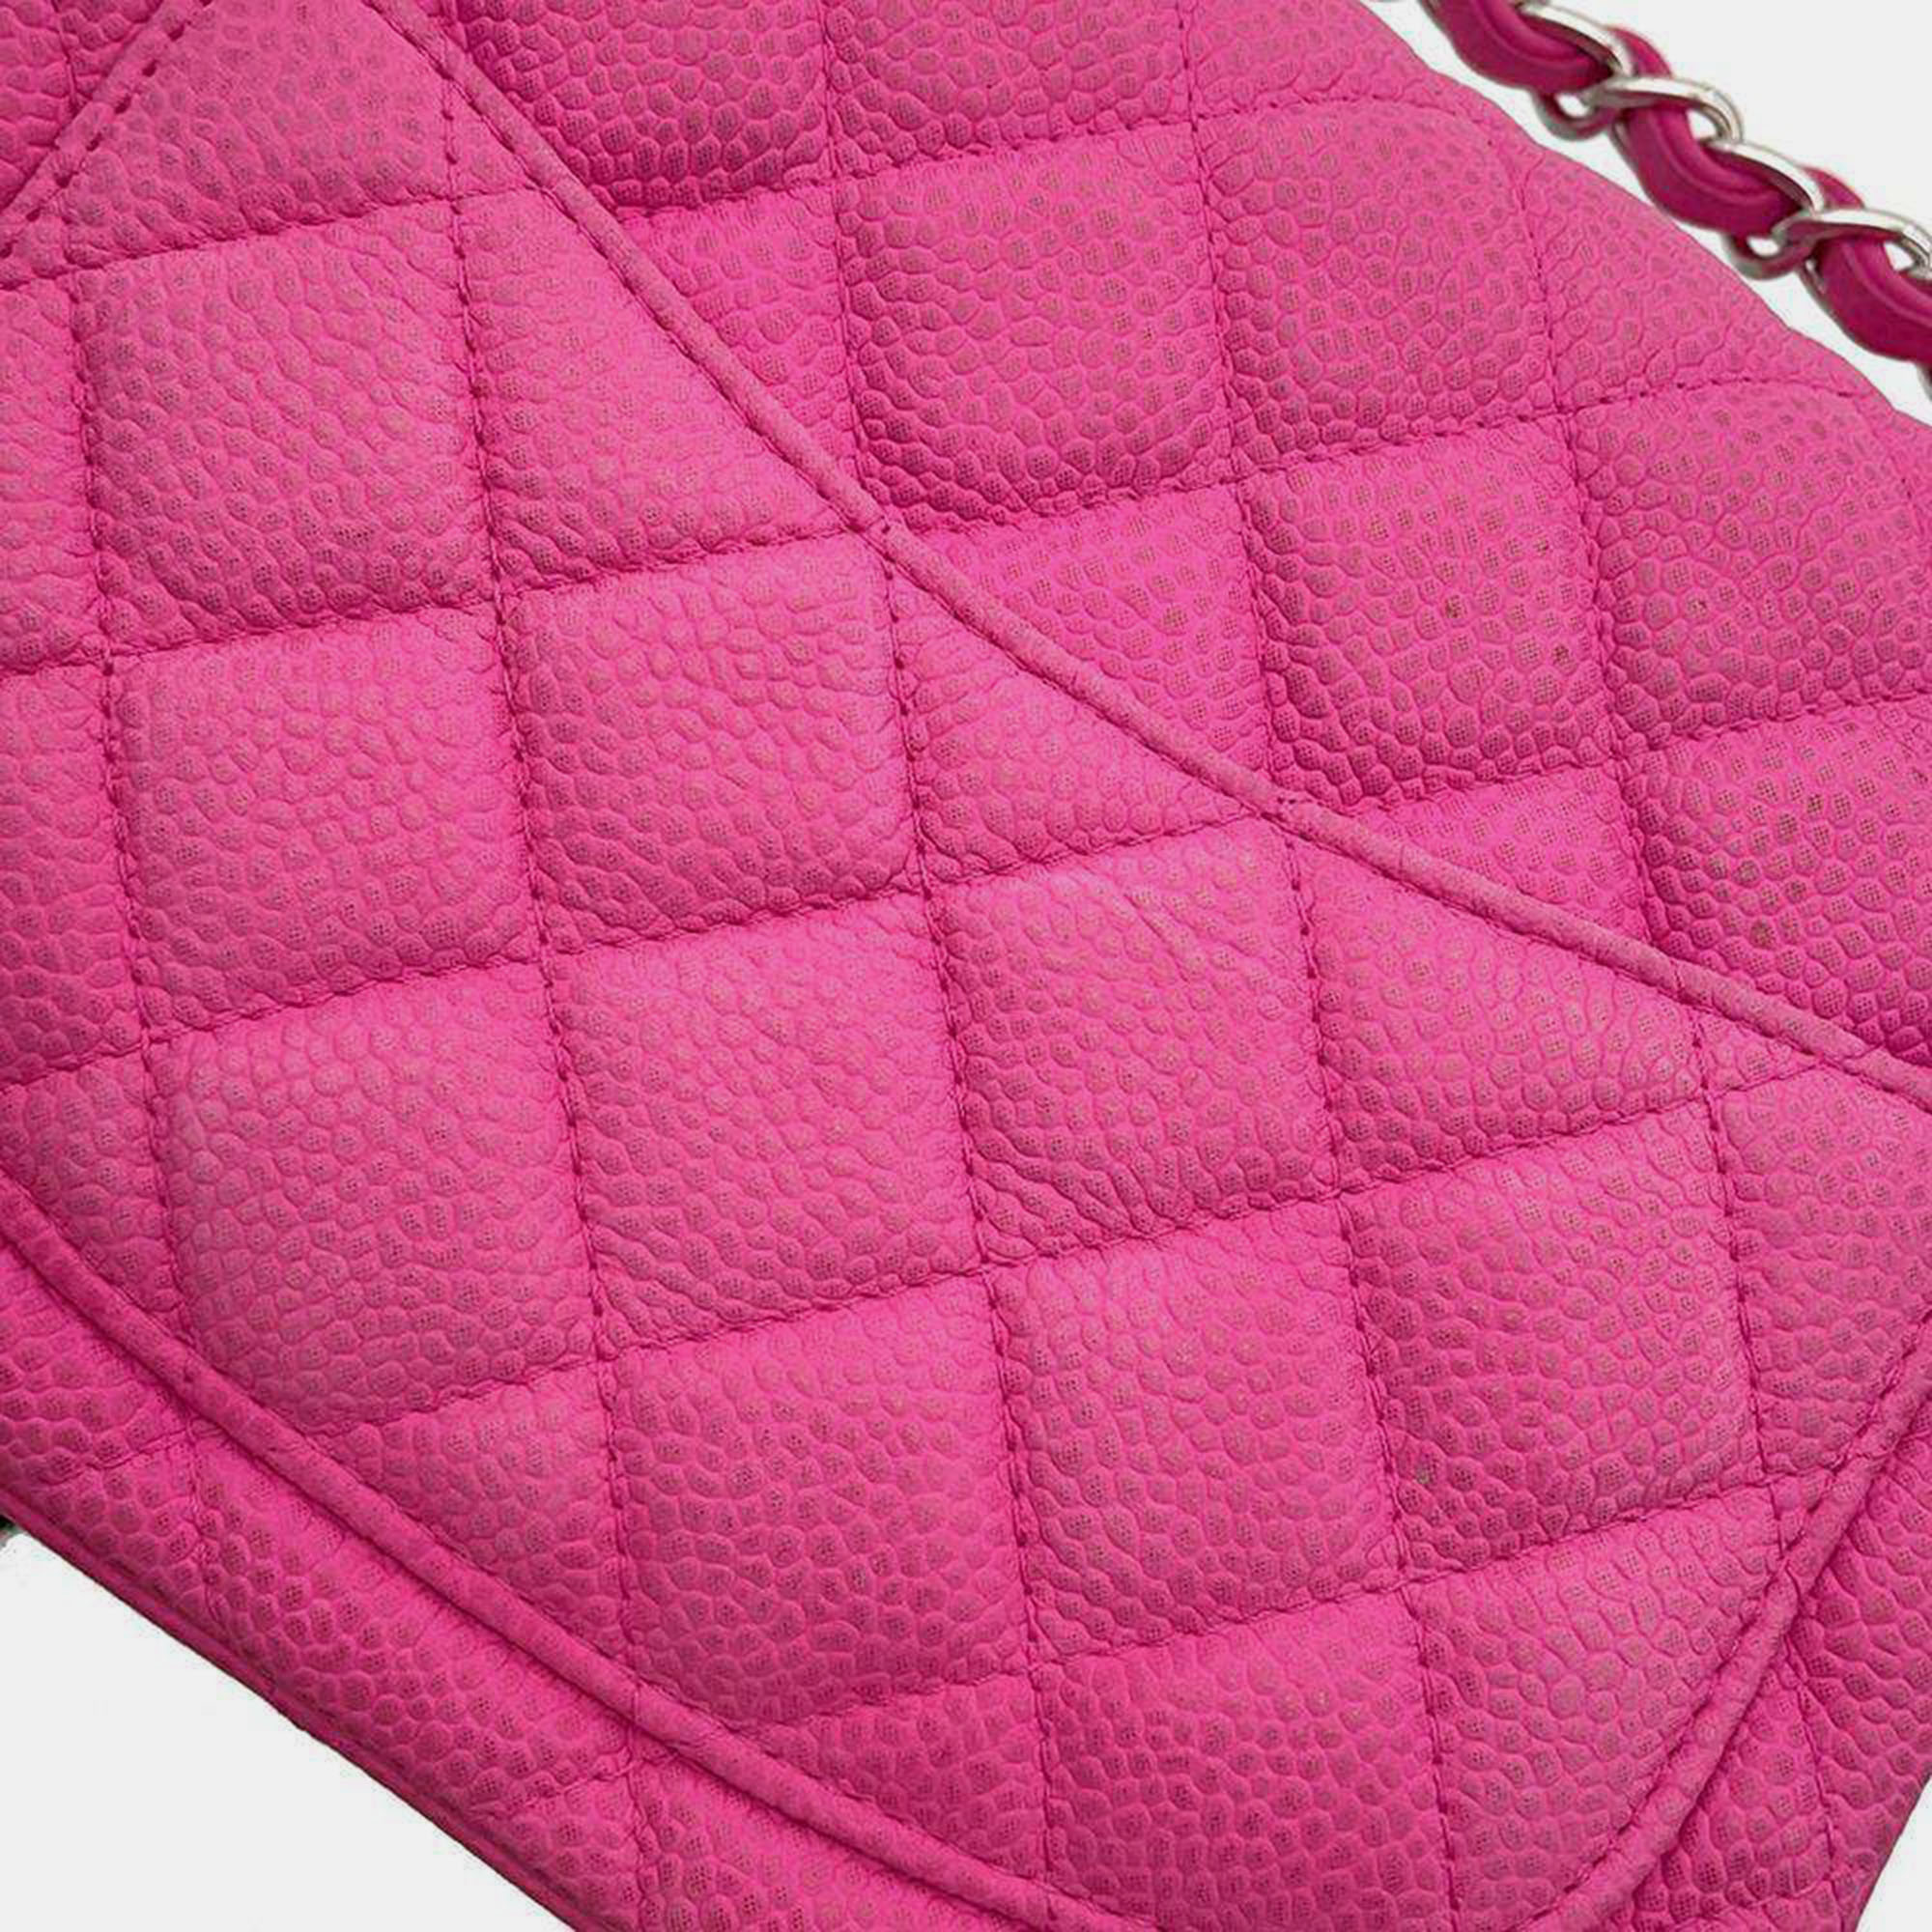 Chanel Pink Leather Cc Flap Bag